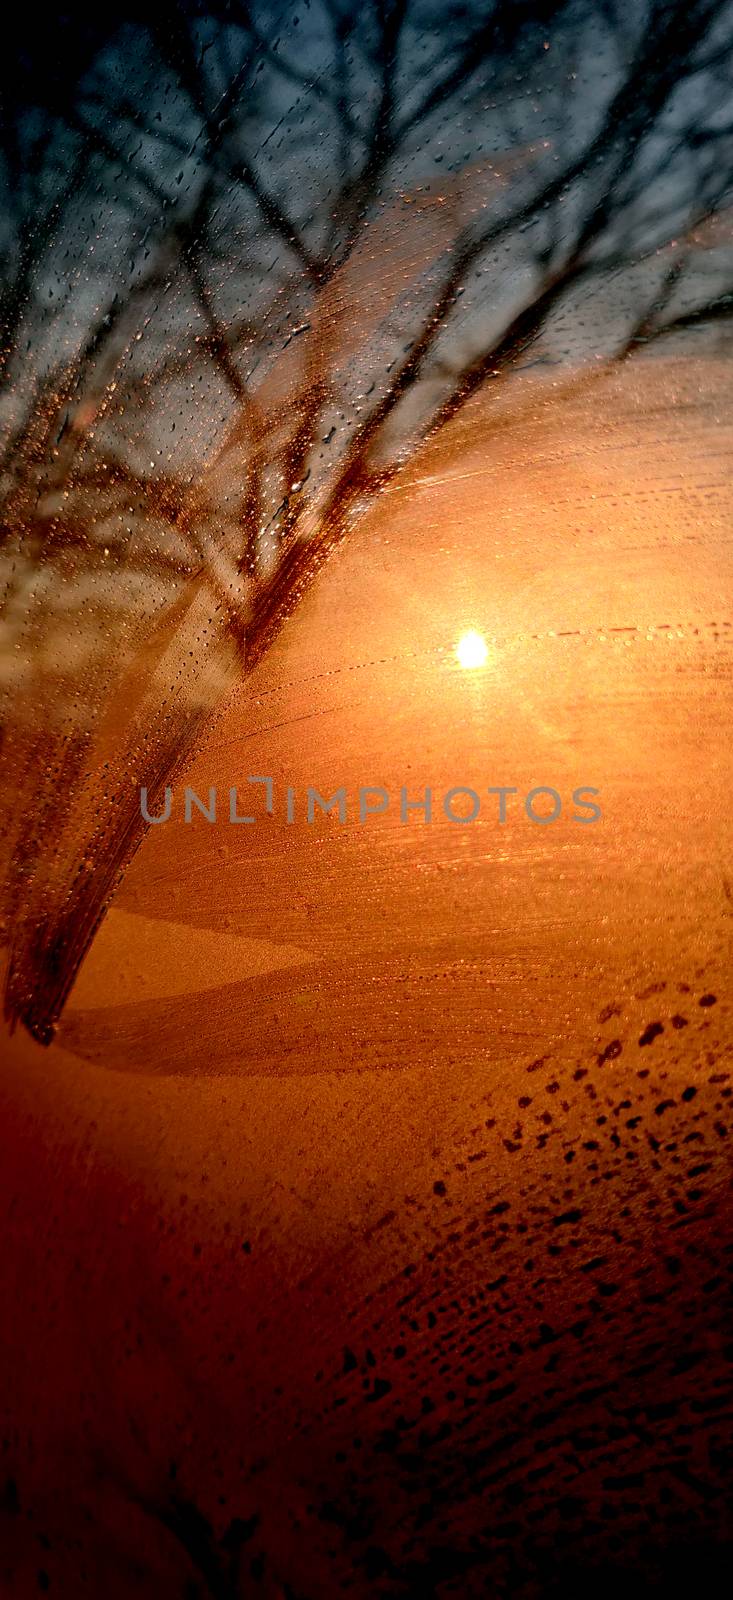 Abstract image of sunrise seen through foggy glass and textured tree. by mshivangi92